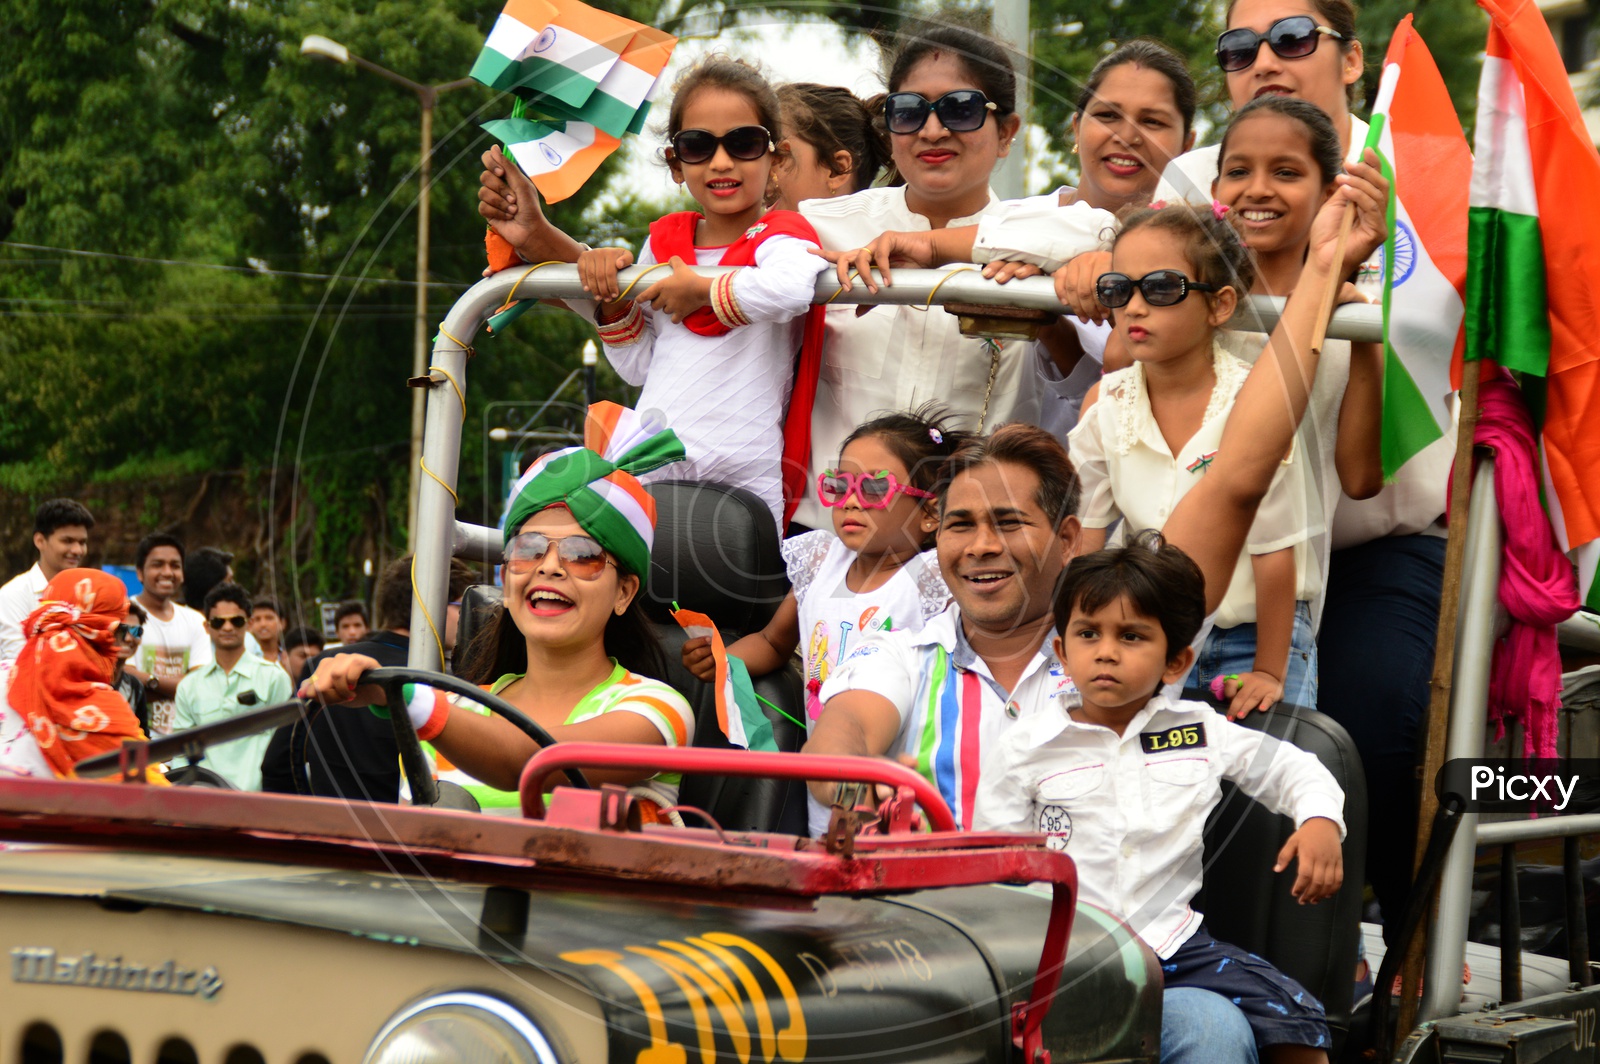 Young Indian People With   Indian National Flag ( Tri-Color ) Celebrating Independence Day